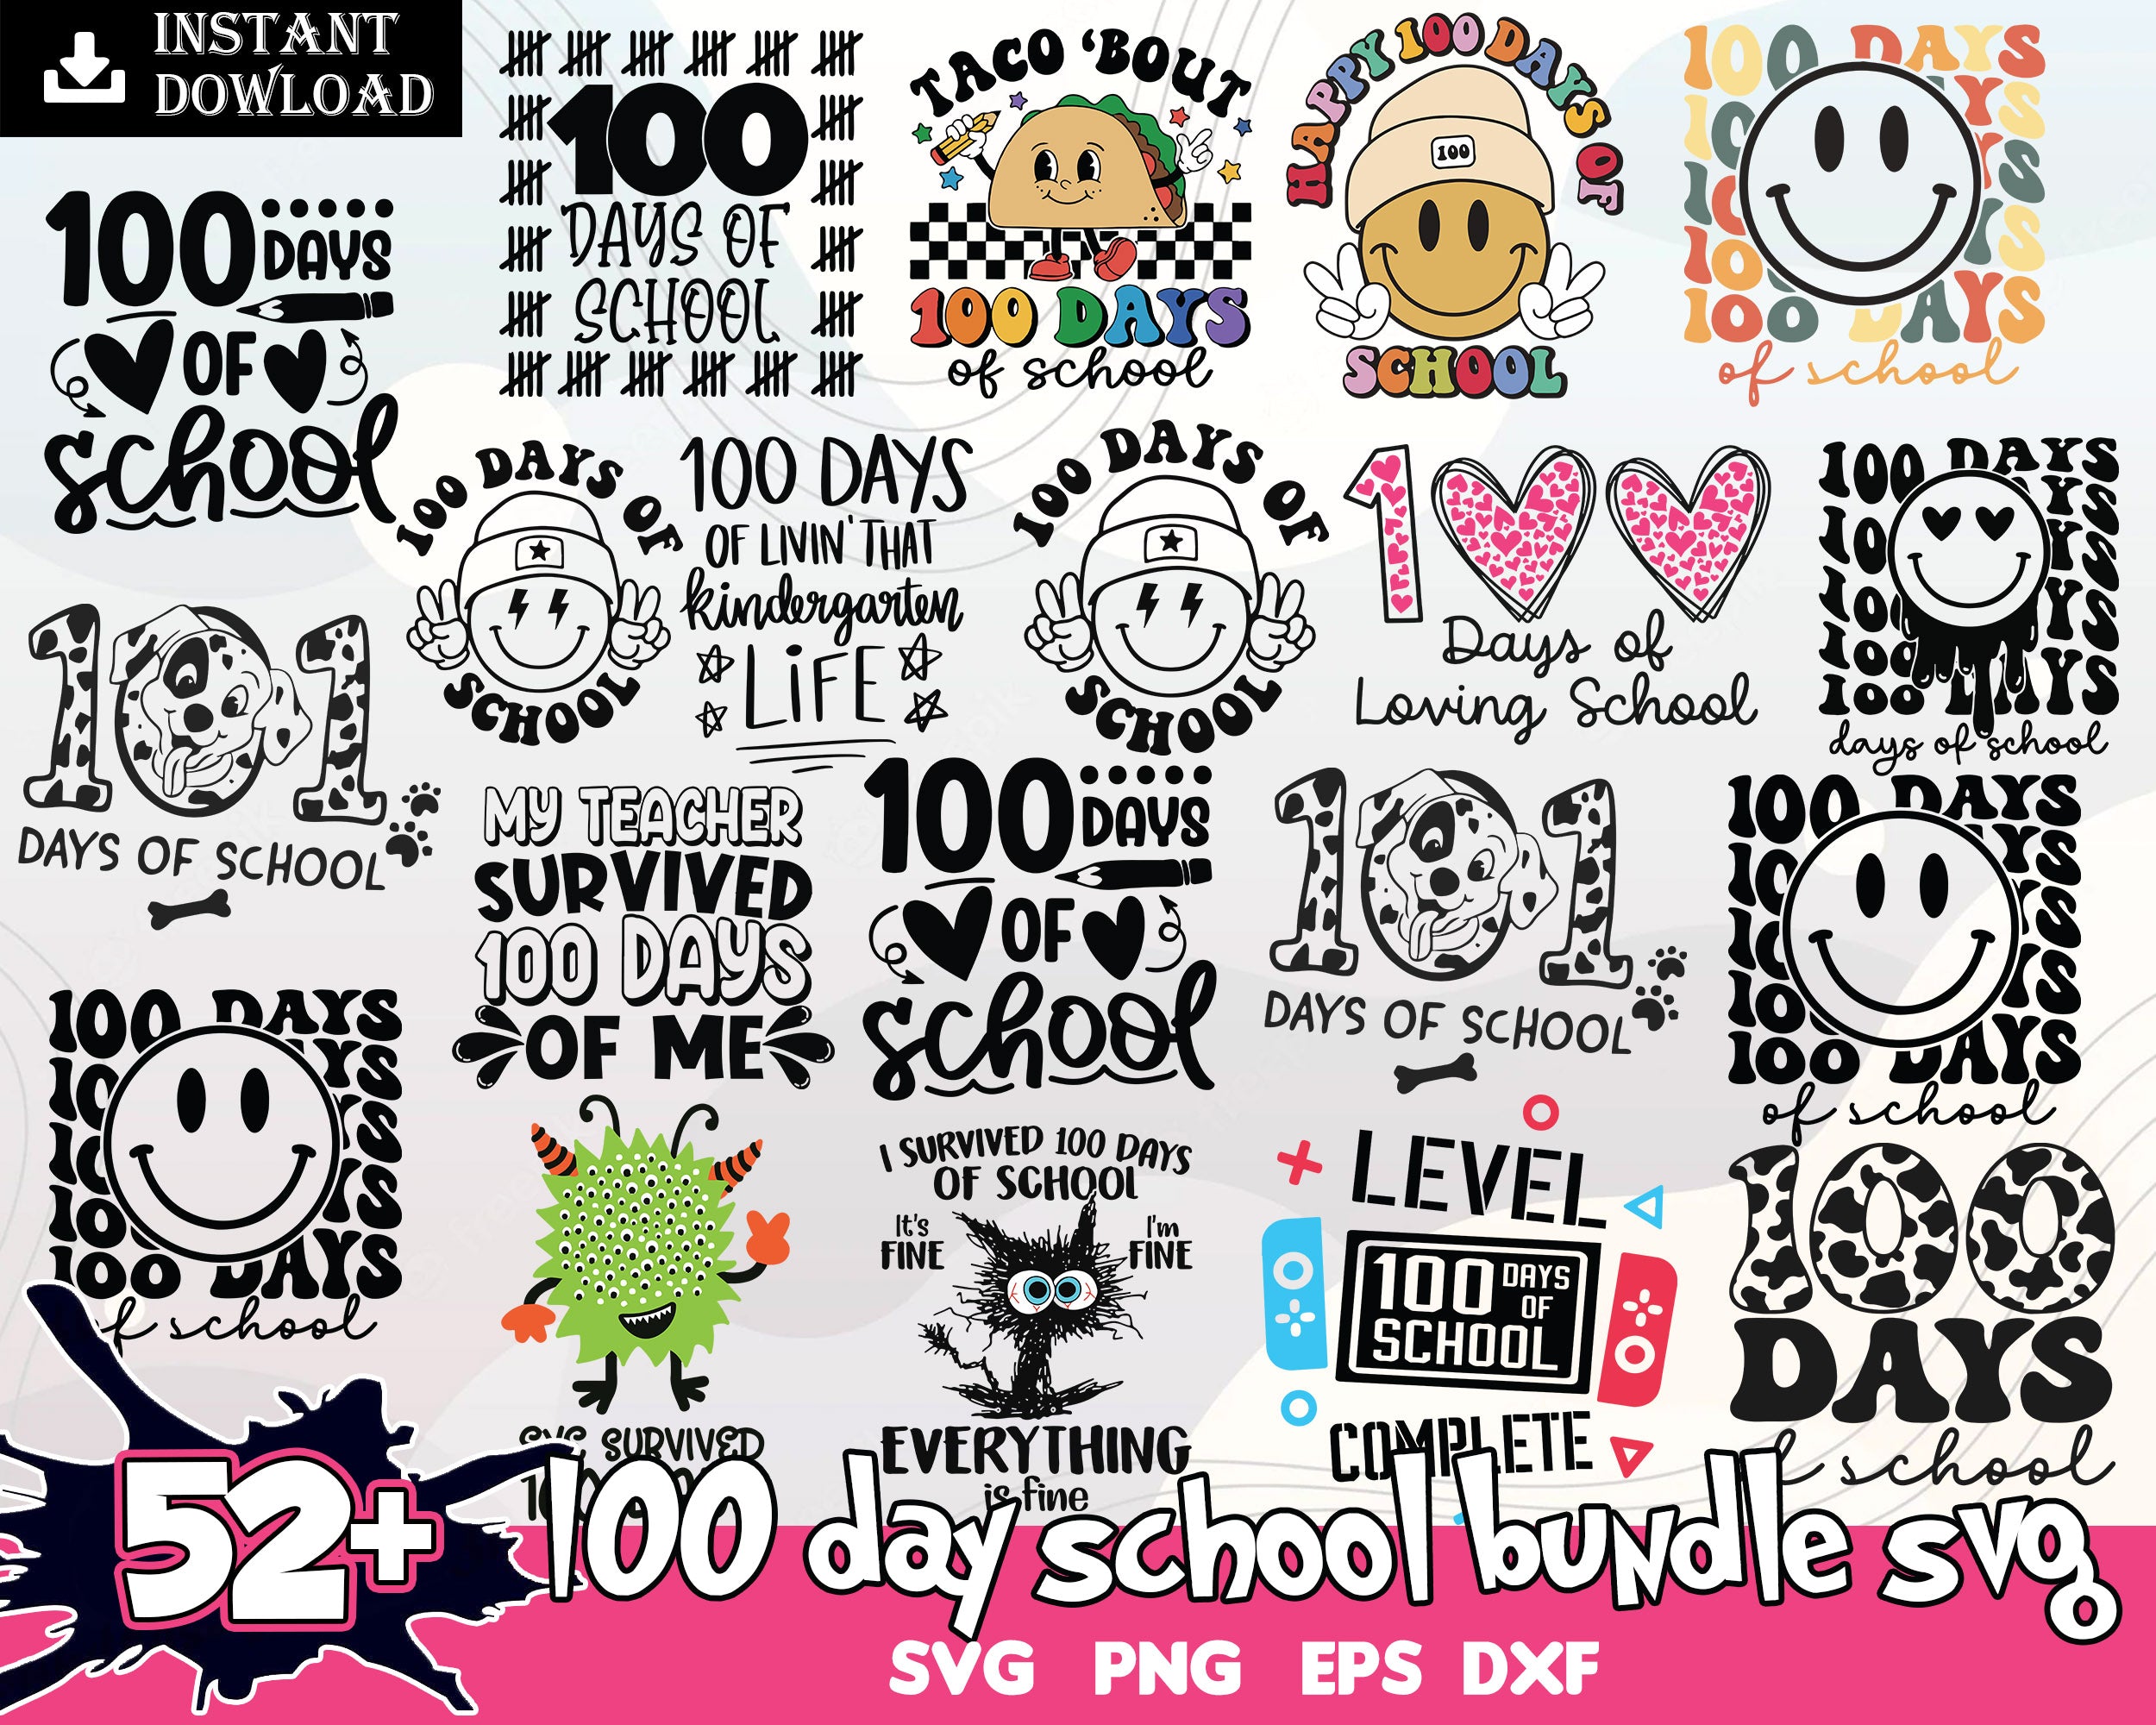 52+ 100 Days of School quotes svg, Happy 100 Days of School Svg, Back to School Svg png eps dxf, Teacher School Svg